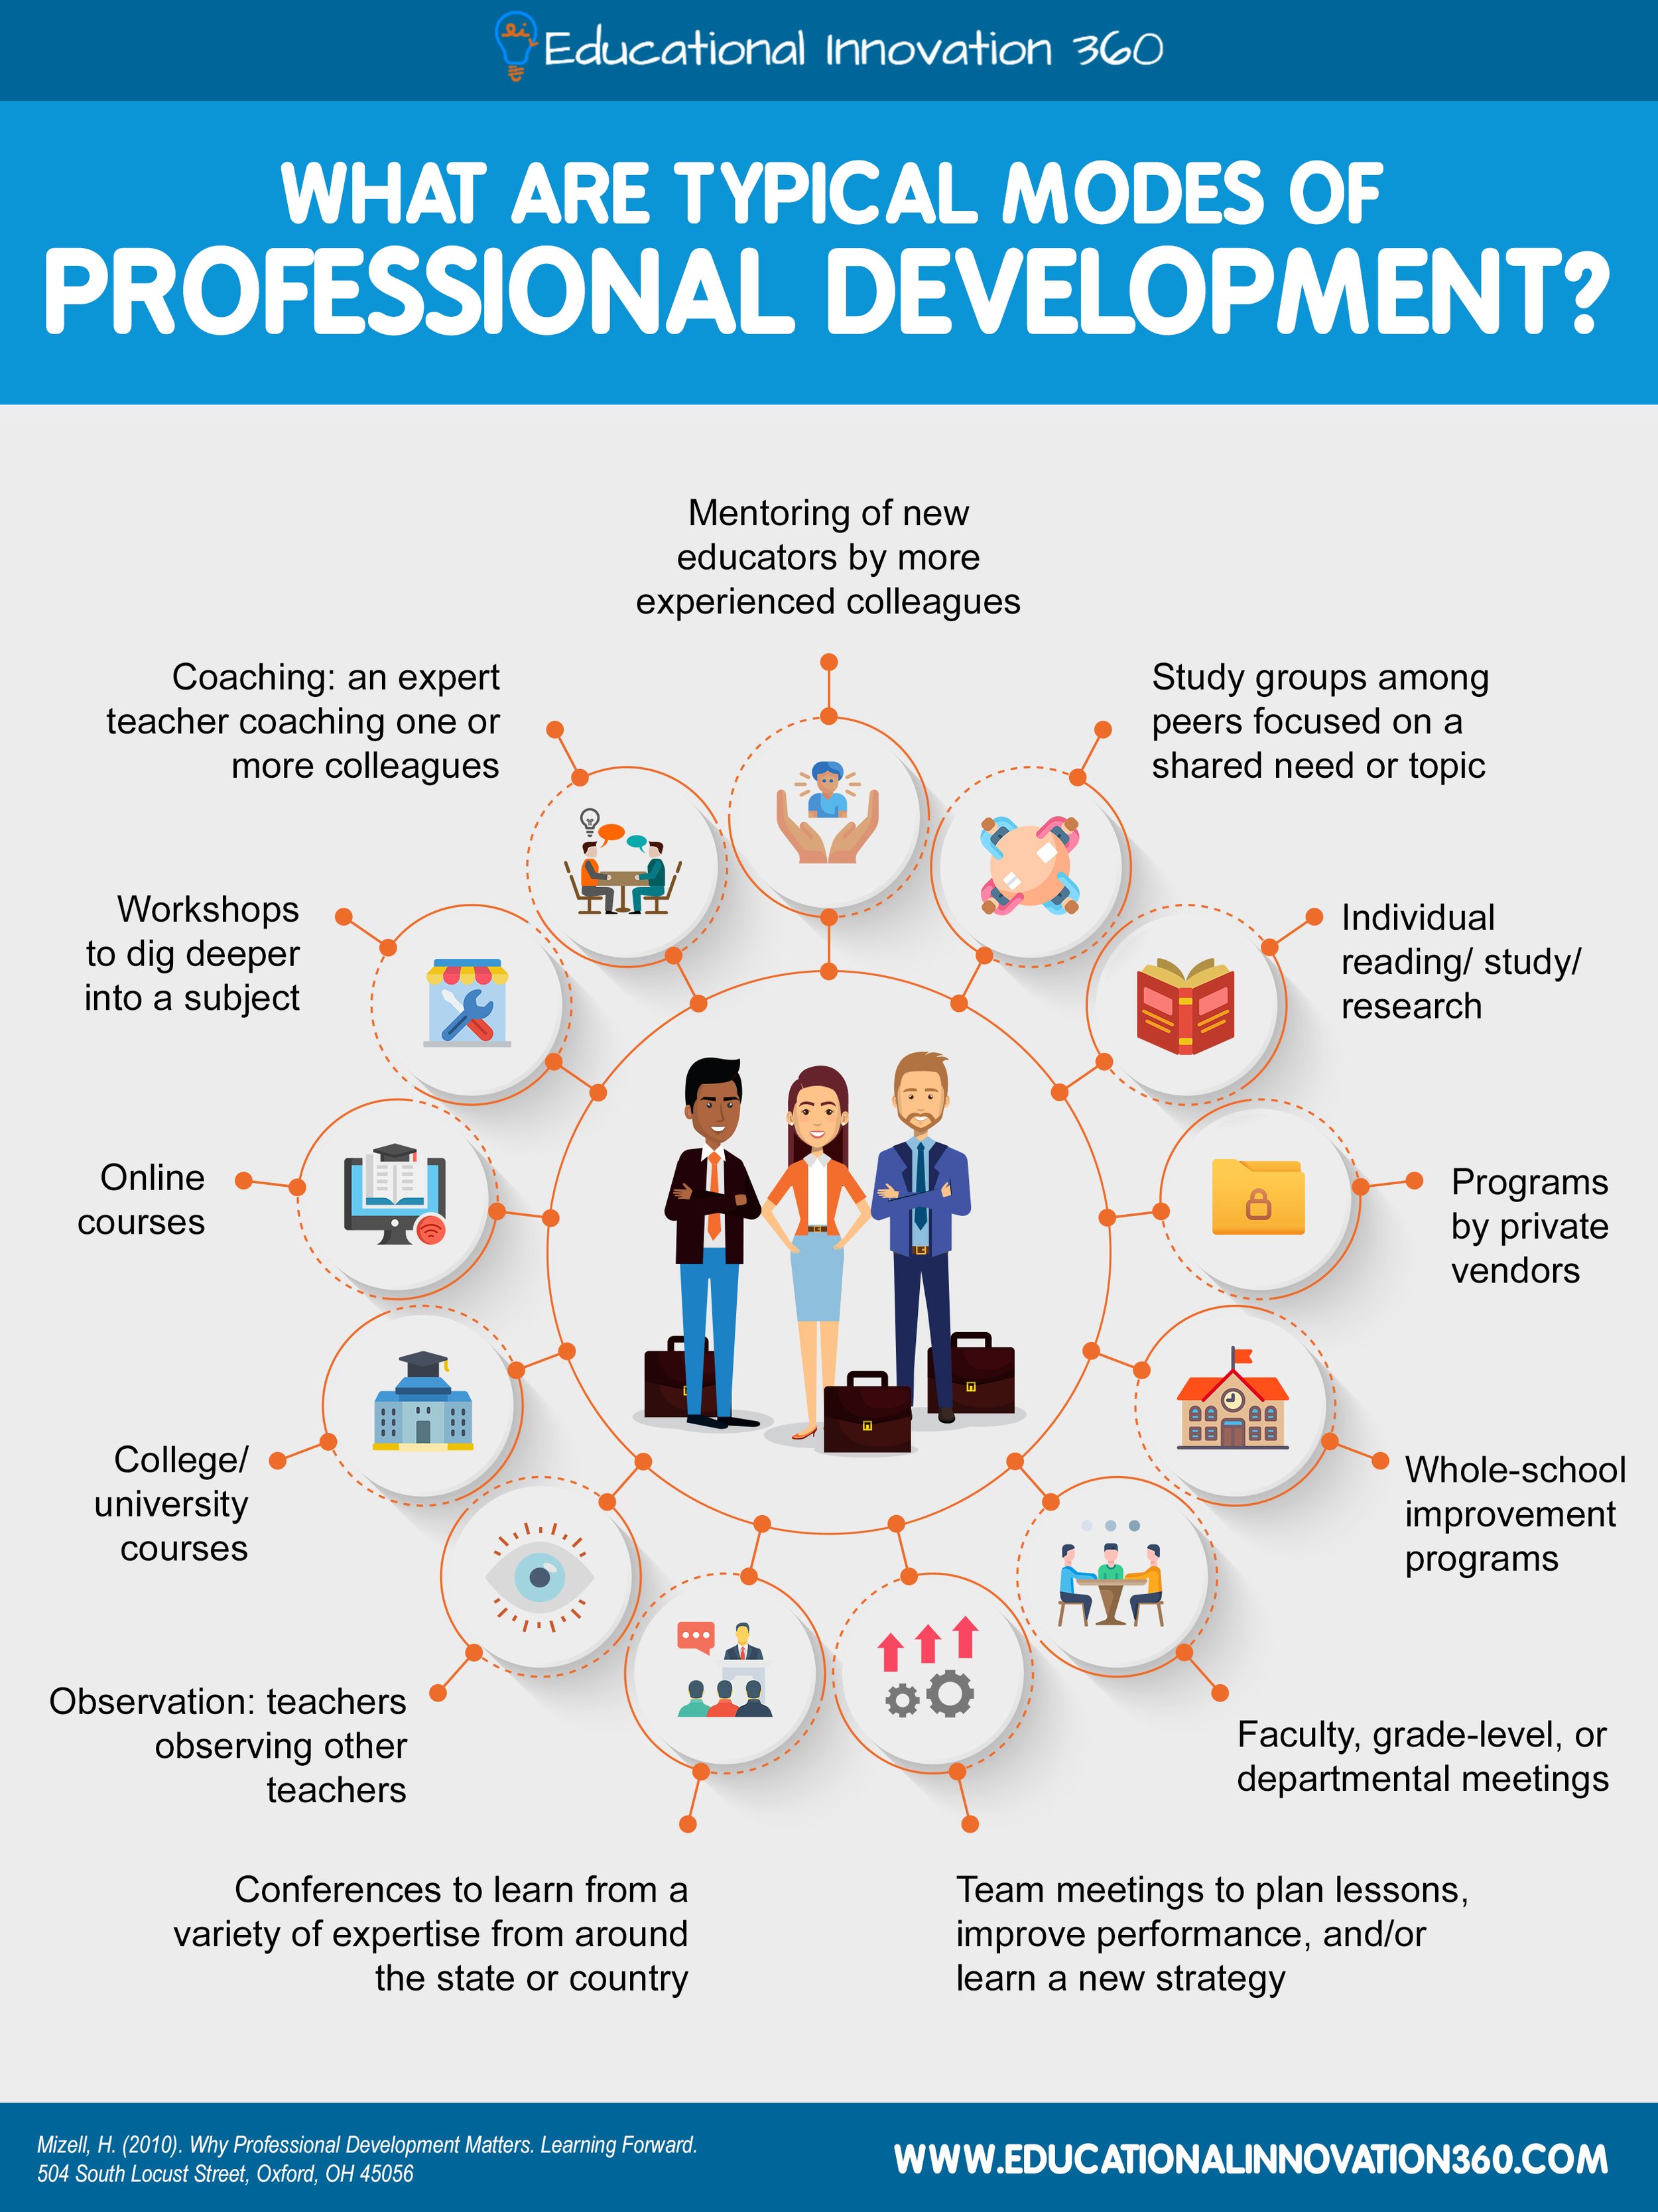 how does research help professional development